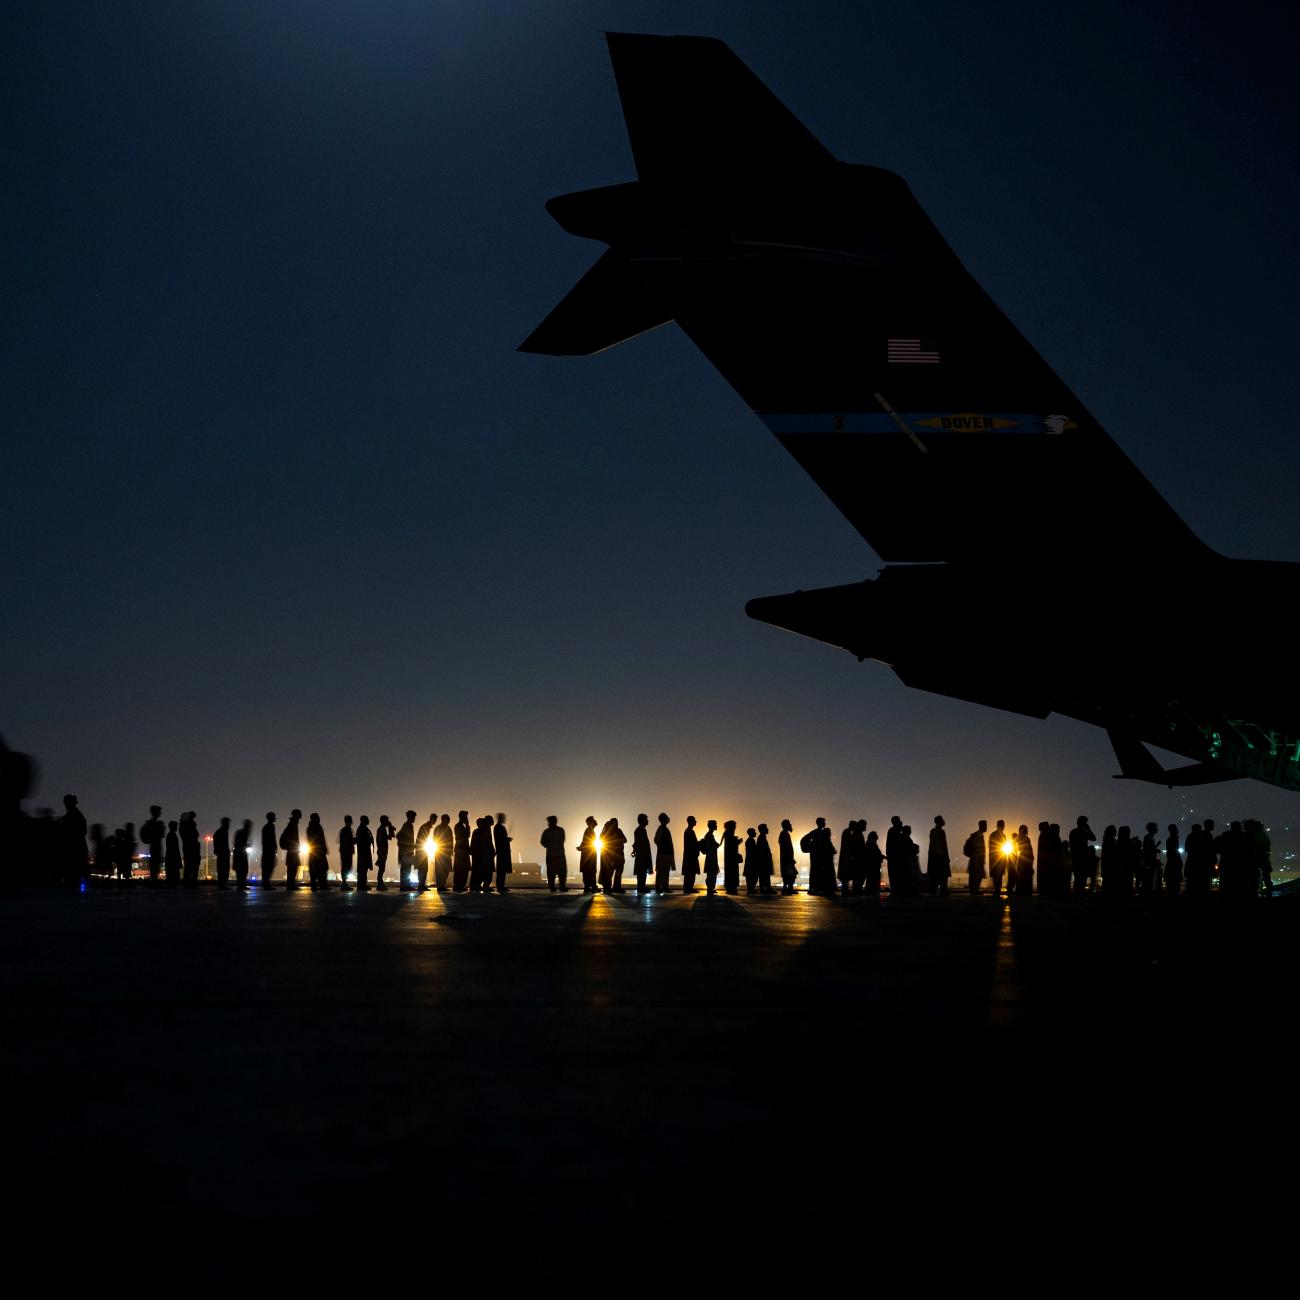 U.S. Air Force aircrew prepare evacuees to board a C-17 Globemaster III aircraft in support of the Afghanistan evacuation at Hamid Karzai International Airport, Afghanistan, on August 21, 2021. 